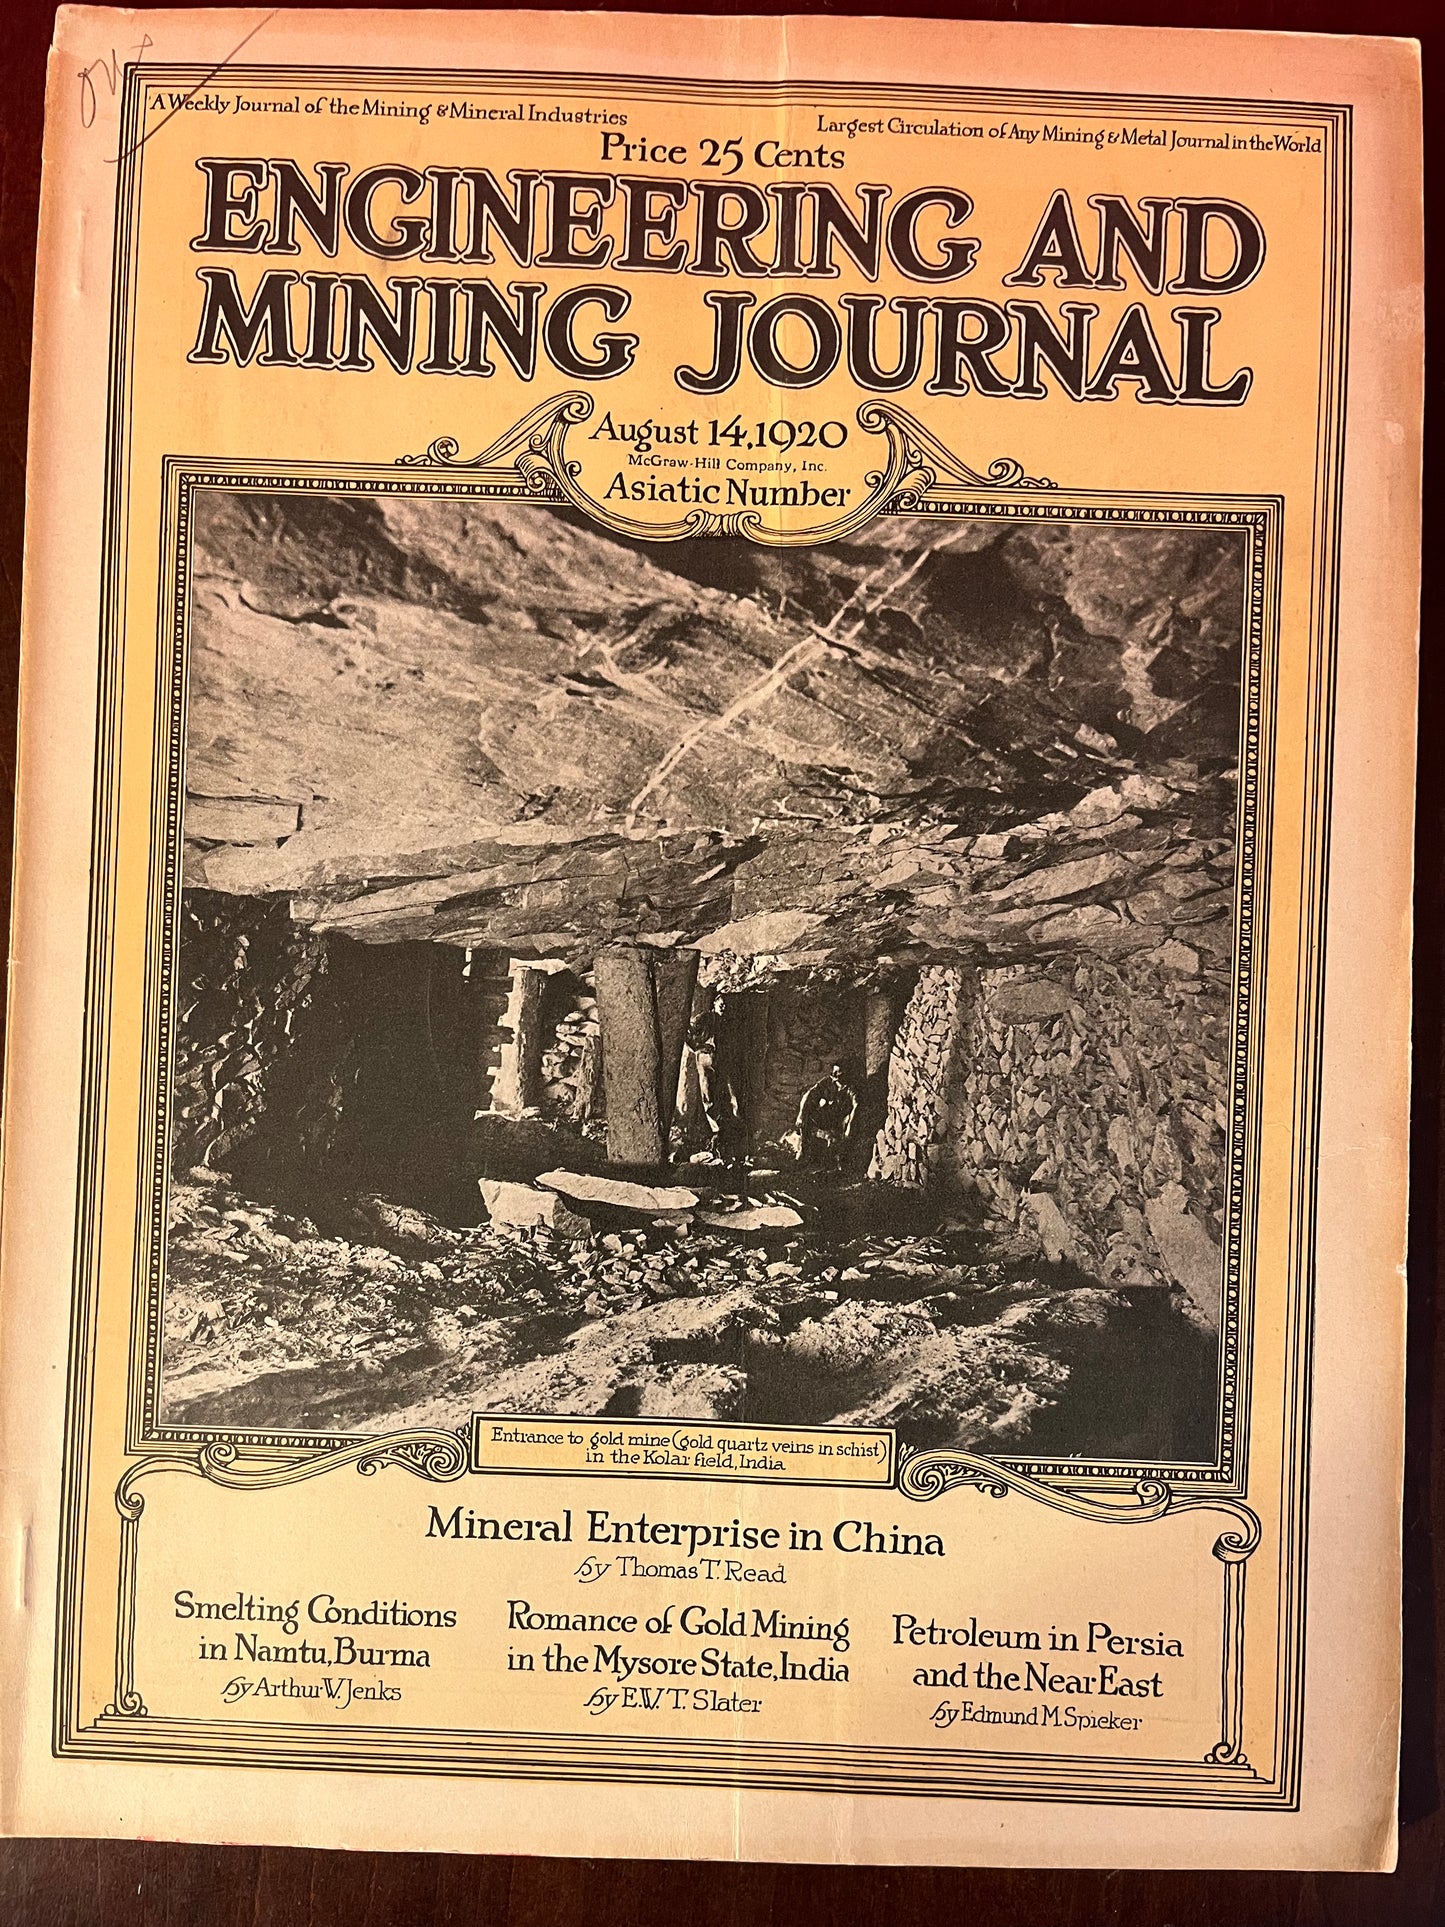 1920 Engineering and Mining Journal - August Asiatic Edition